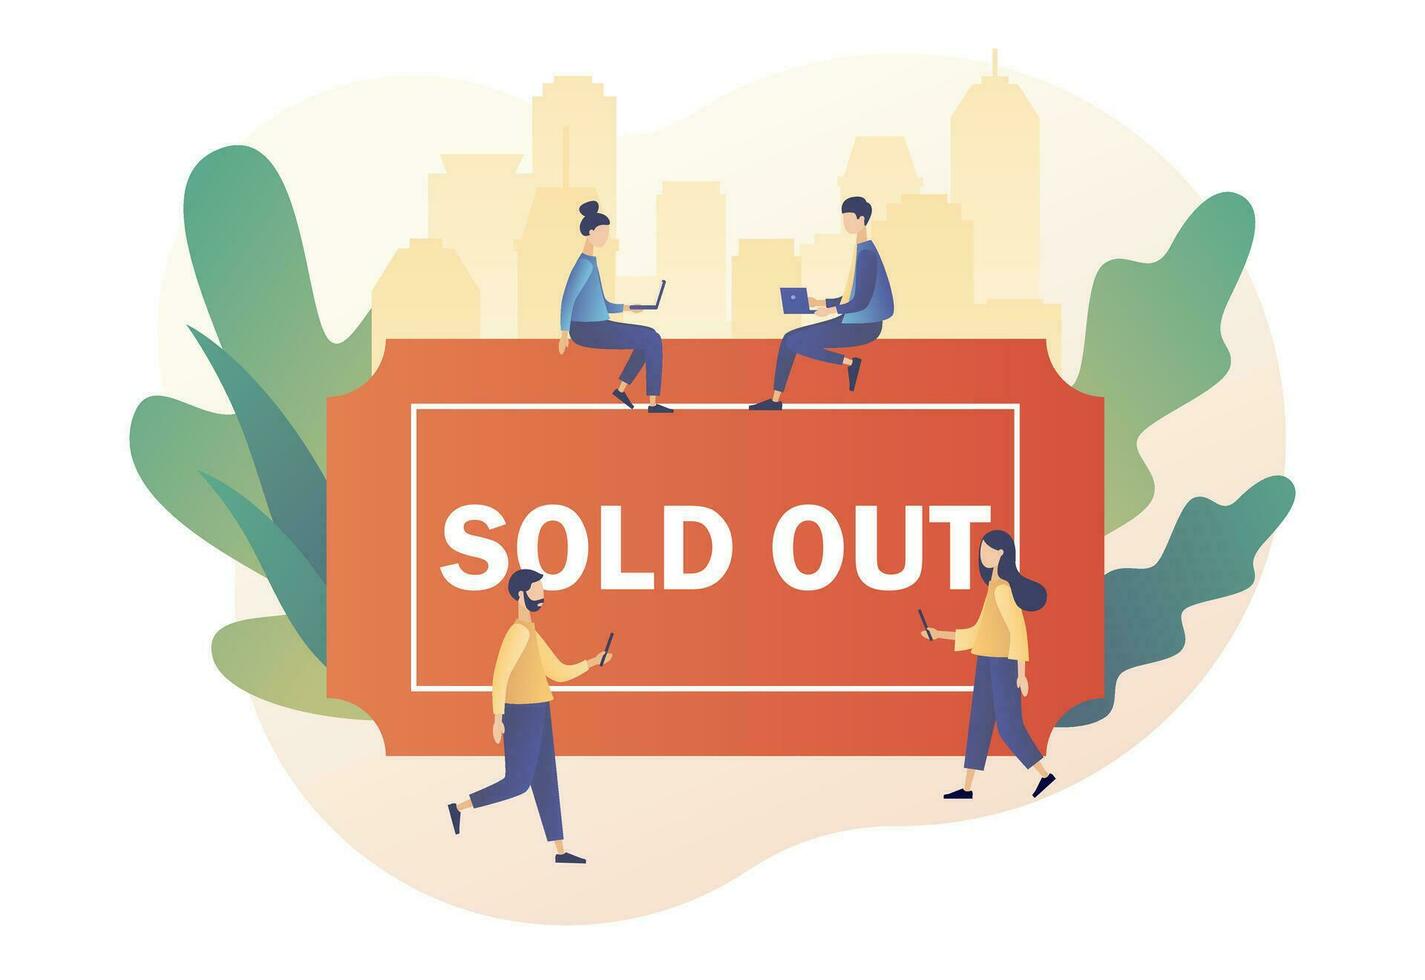 Tiny people use online booking system. Sold out event, sold-out crowd, no tickets available concept. Modern flat cartoon style. Vector illustration on white background